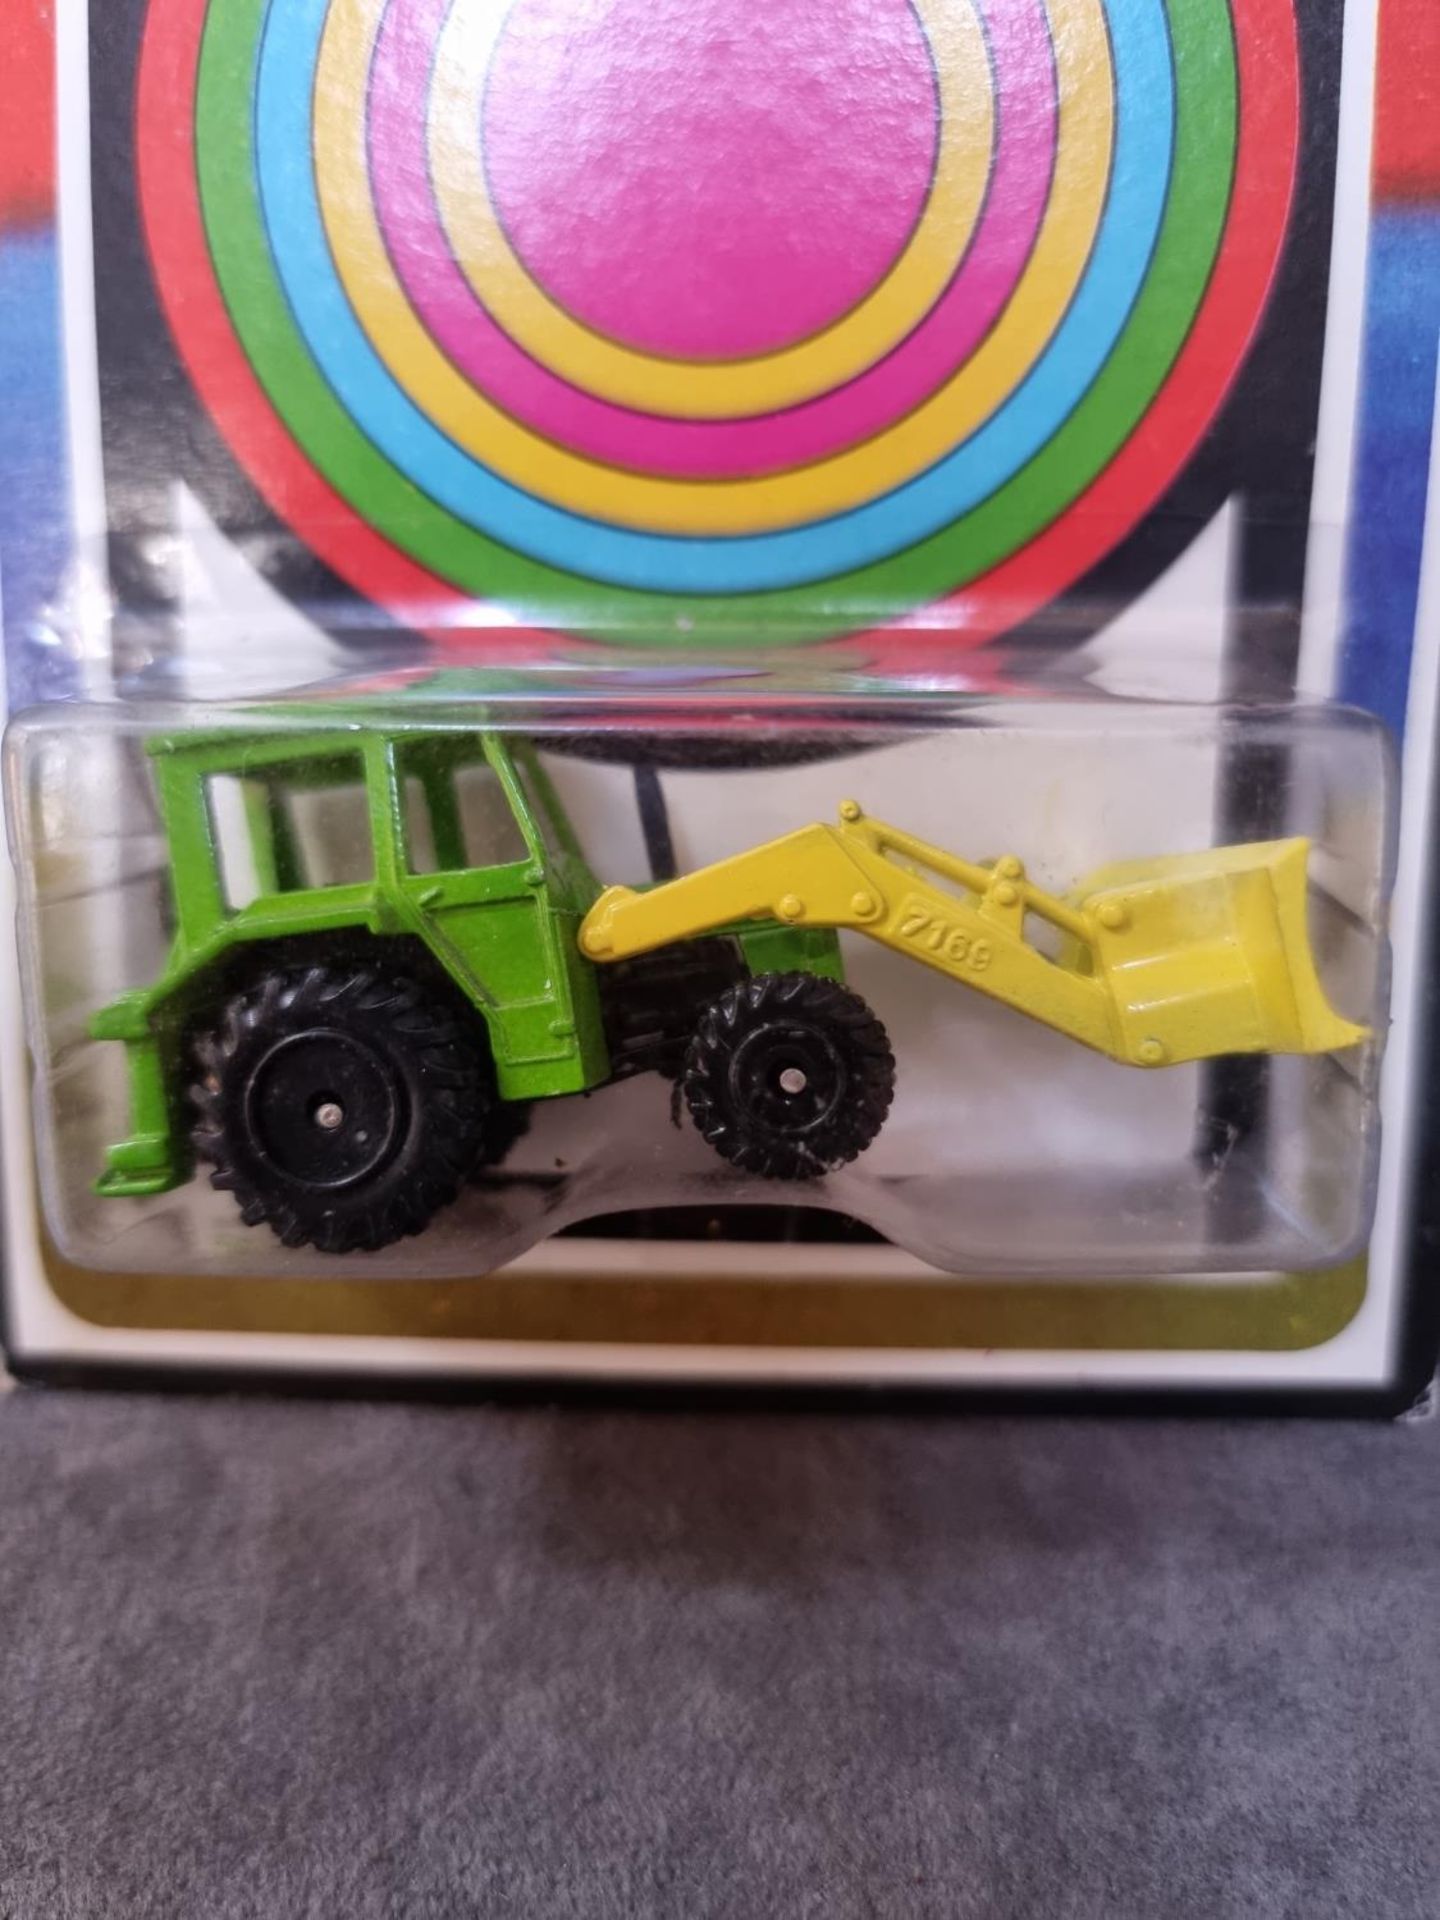 Playart Diecast Metal #7169 Tractor With Angeldozer On Card Playart Was A Toy Company Owned By - Image 2 of 2